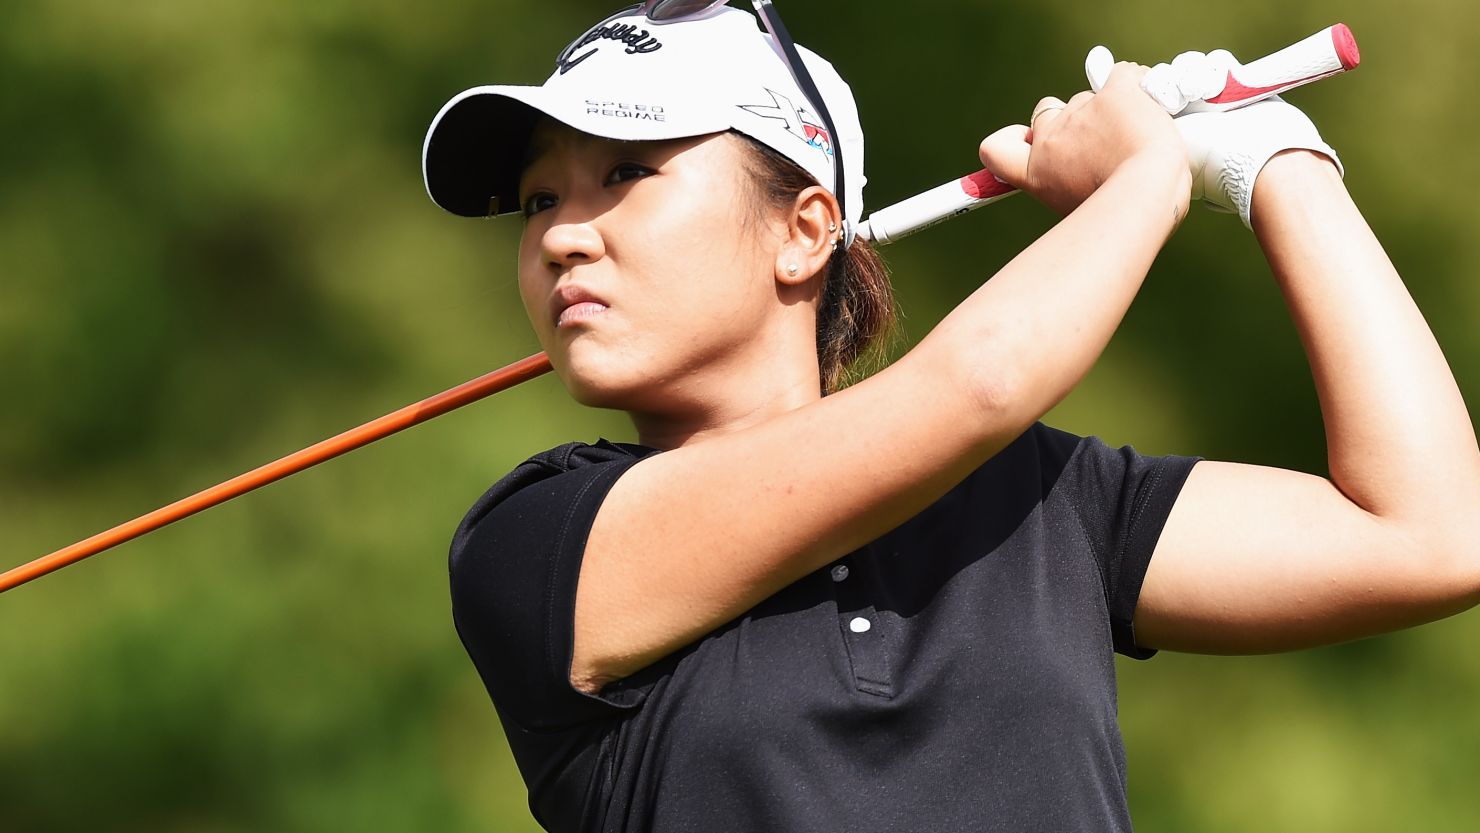 Lydia Ko stepped up her bid to make golfing history with a four-under-par 67 at the Evian Championship in France.